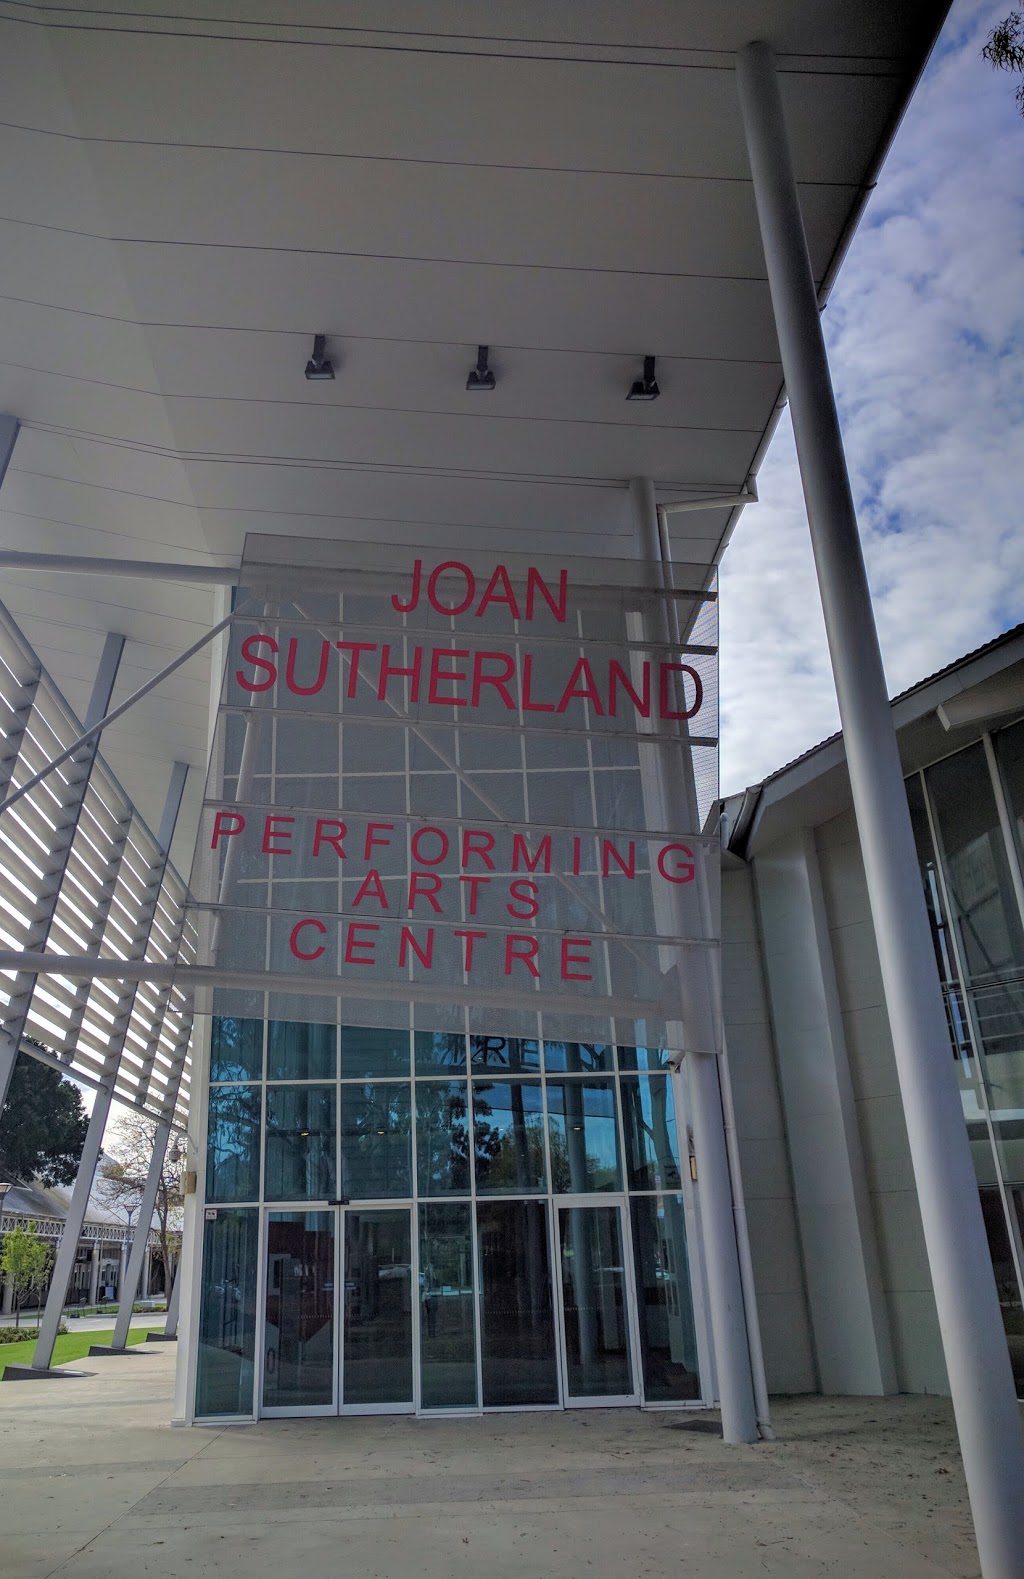 Joan Sutherland Performing Arts Centre | school | 597 High St, Penrith NSW 2750, Australia | 0247237611 OR +61 2 4723 7611